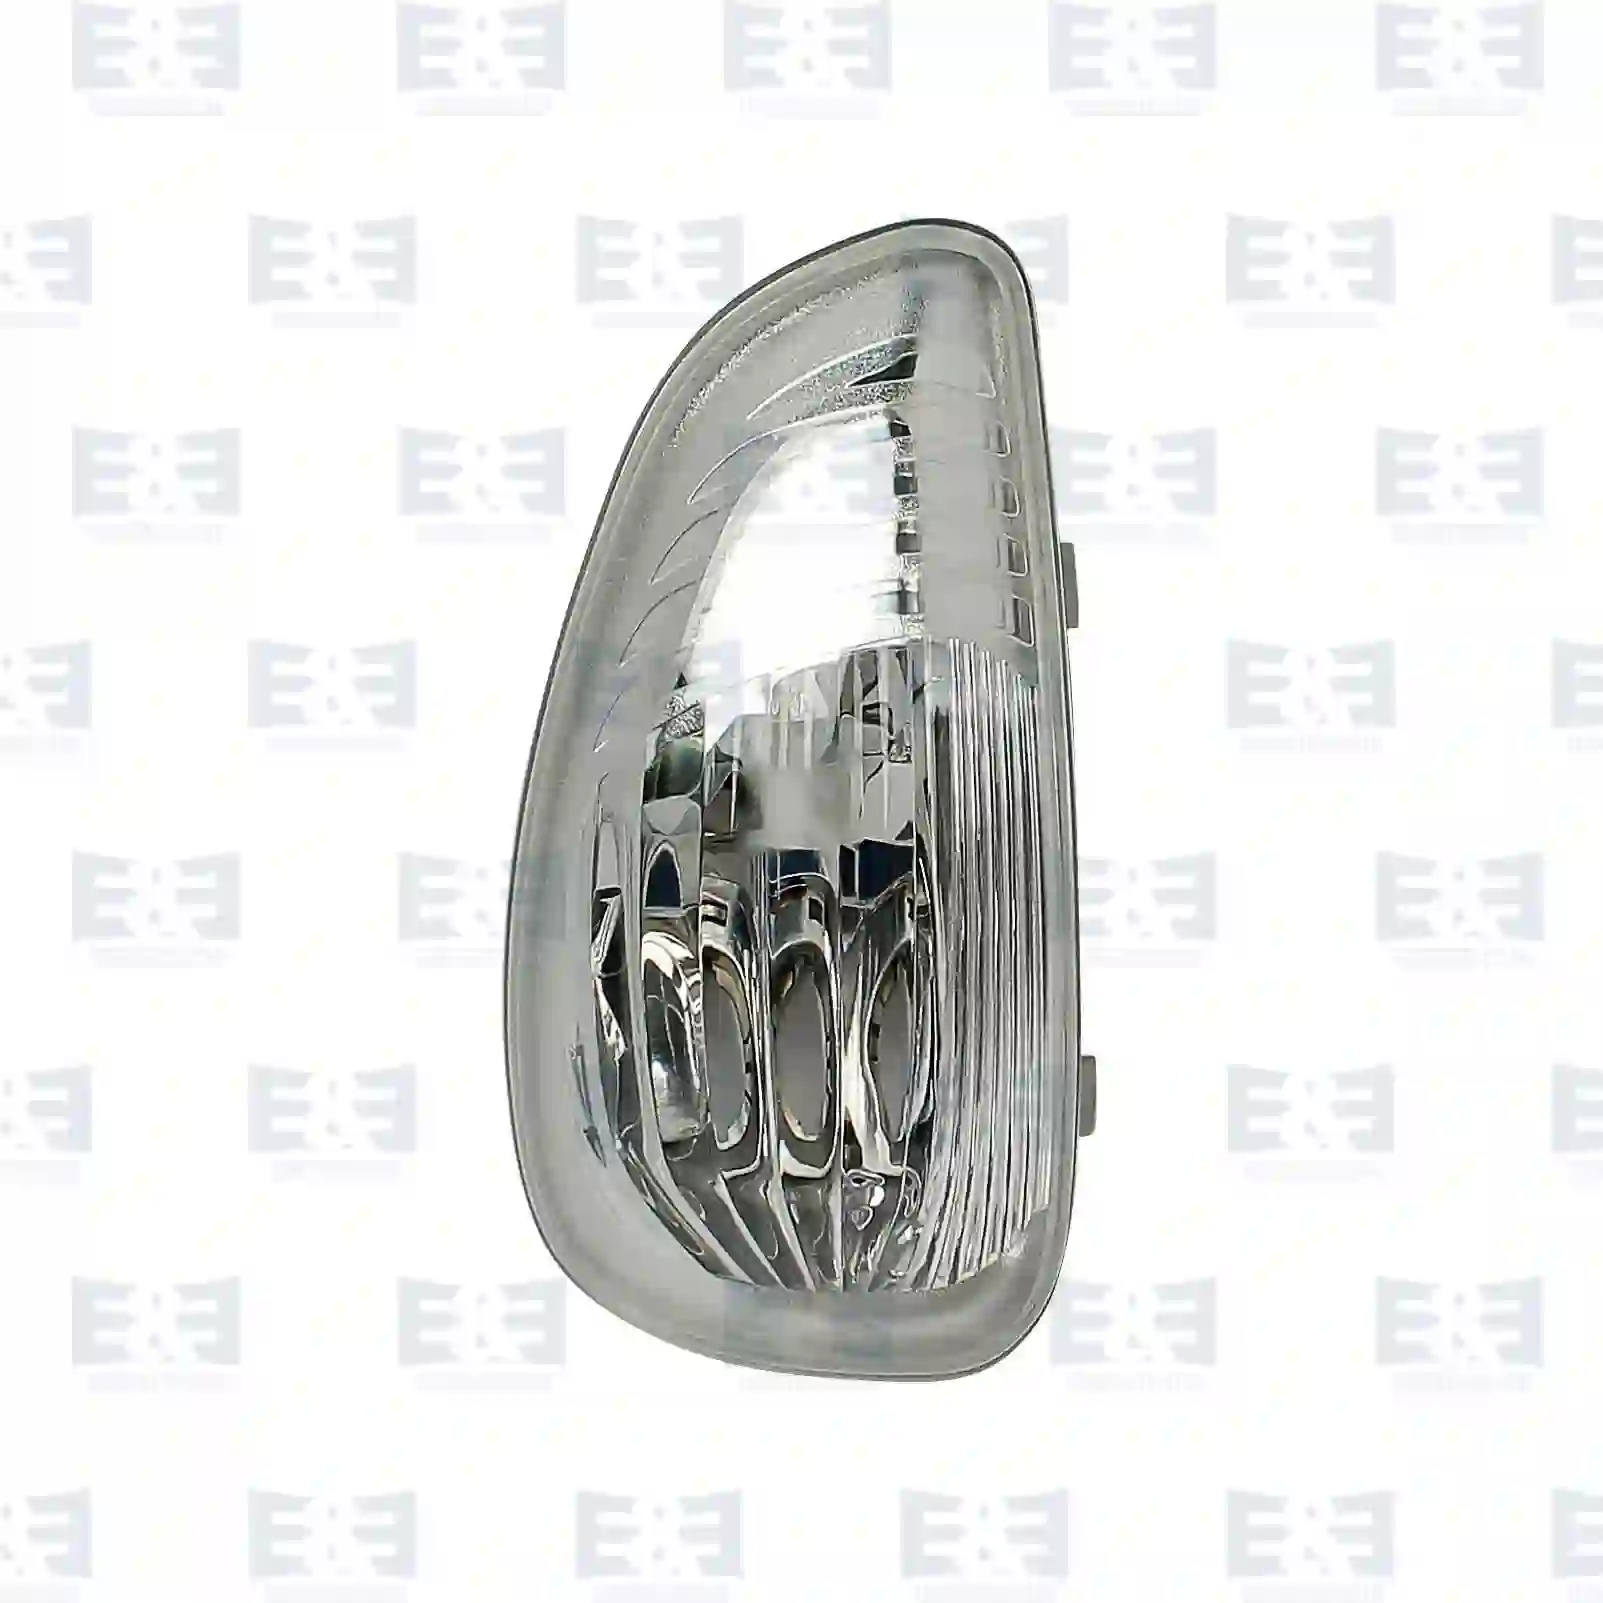 Turn signal lamp, left, without lamp socket, 2E2298713, 93167593, 4419994, 261650223R, 7485120621, ZG21202-0008 ||  2E2298713 E&E Truck Spare Parts | Truck Spare Parts, Auotomotive Spare Parts Turn signal lamp, left, without lamp socket, 2E2298713, 93167593, 4419994, 261650223R, 7485120621, ZG21202-0008 ||  2E2298713 E&E Truck Spare Parts | Truck Spare Parts, Auotomotive Spare Parts